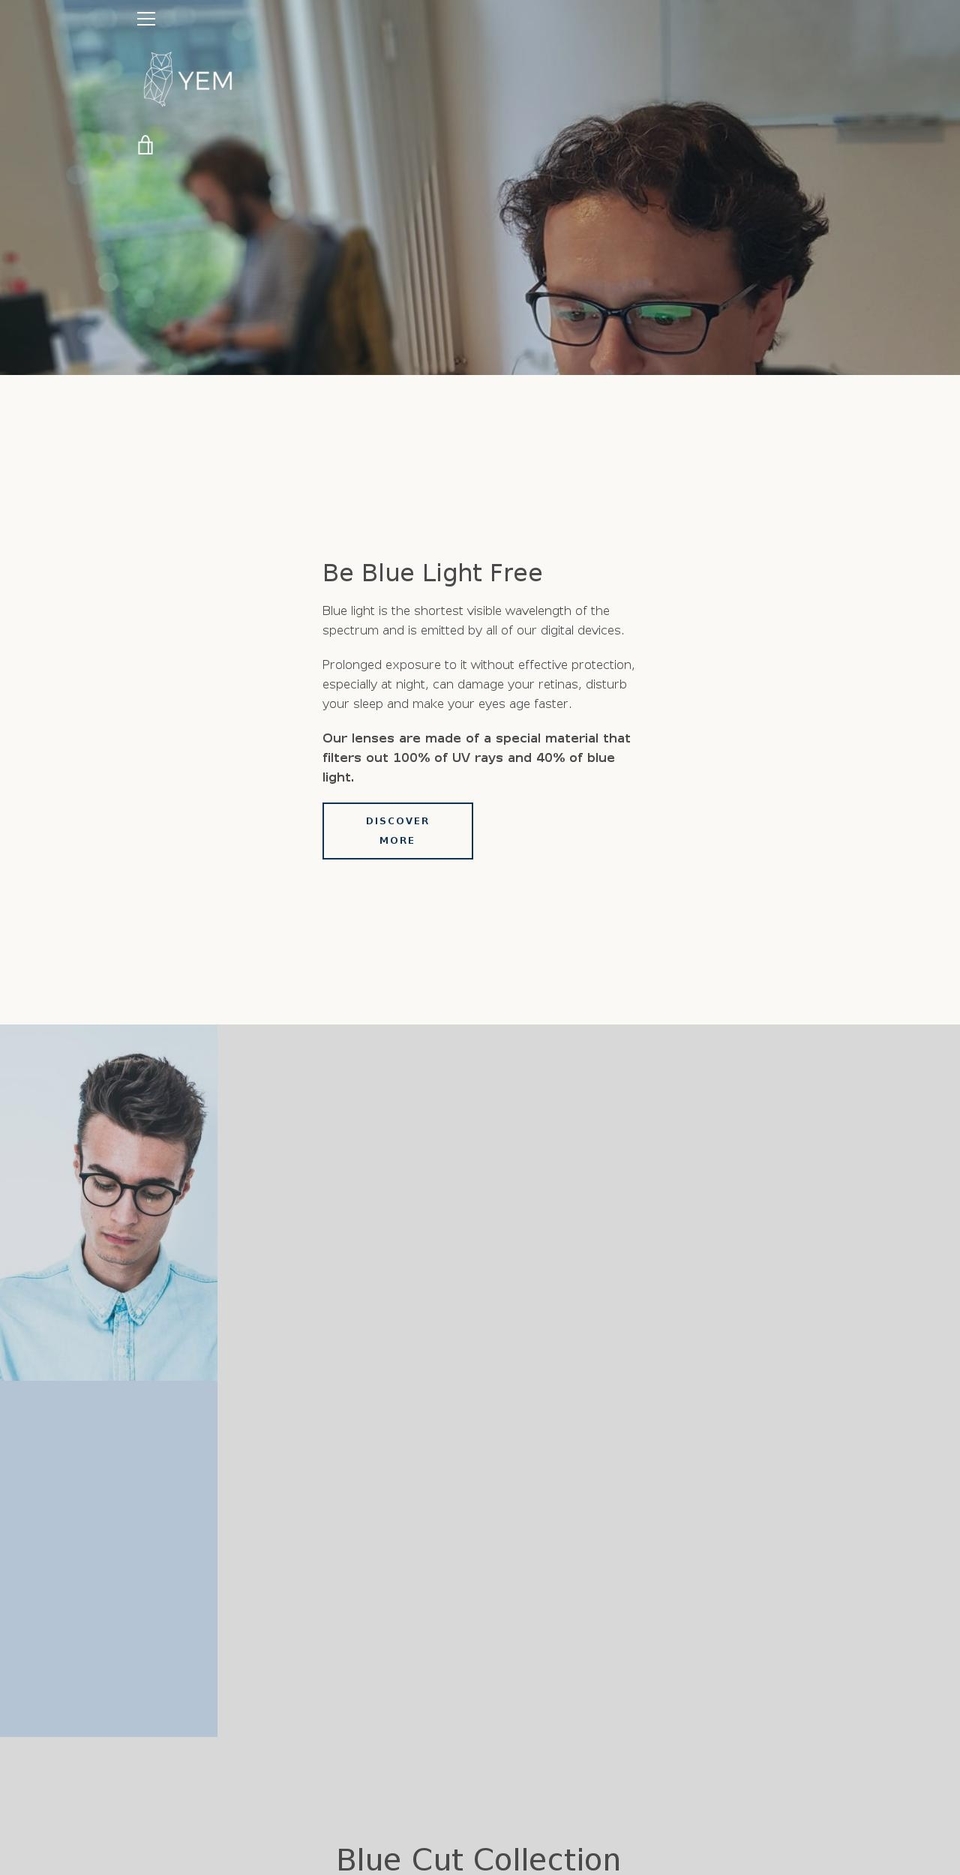 YEM_Official Theme_March18 Shopify theme site example yem.company